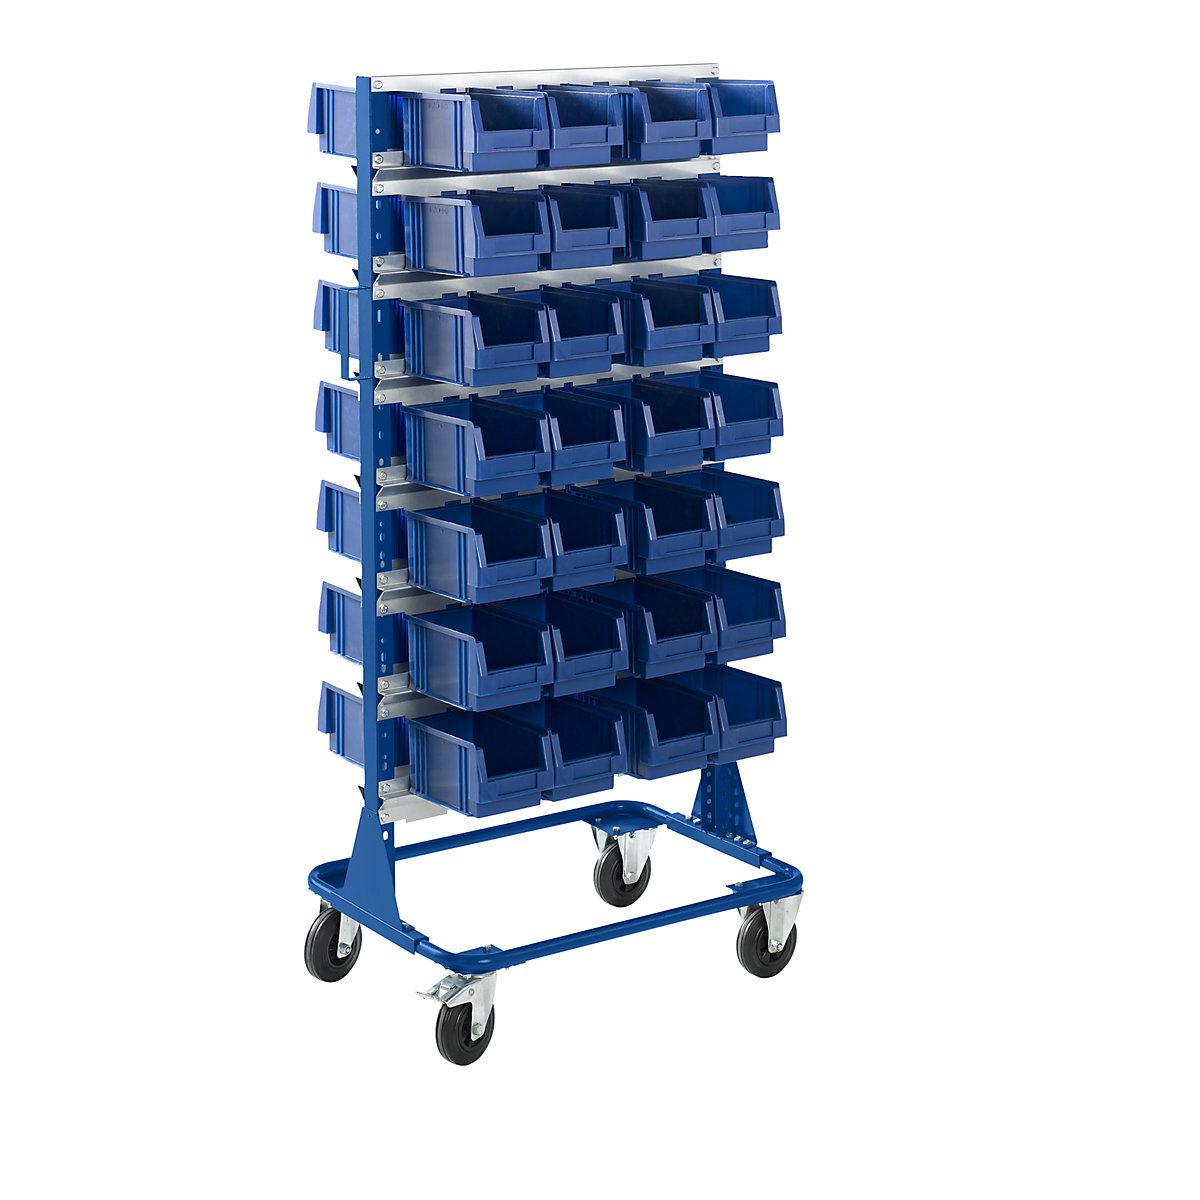 Mobile rack, height 1588 mm, mobile rack with 56 open fronted storage bins, gentian blue-5